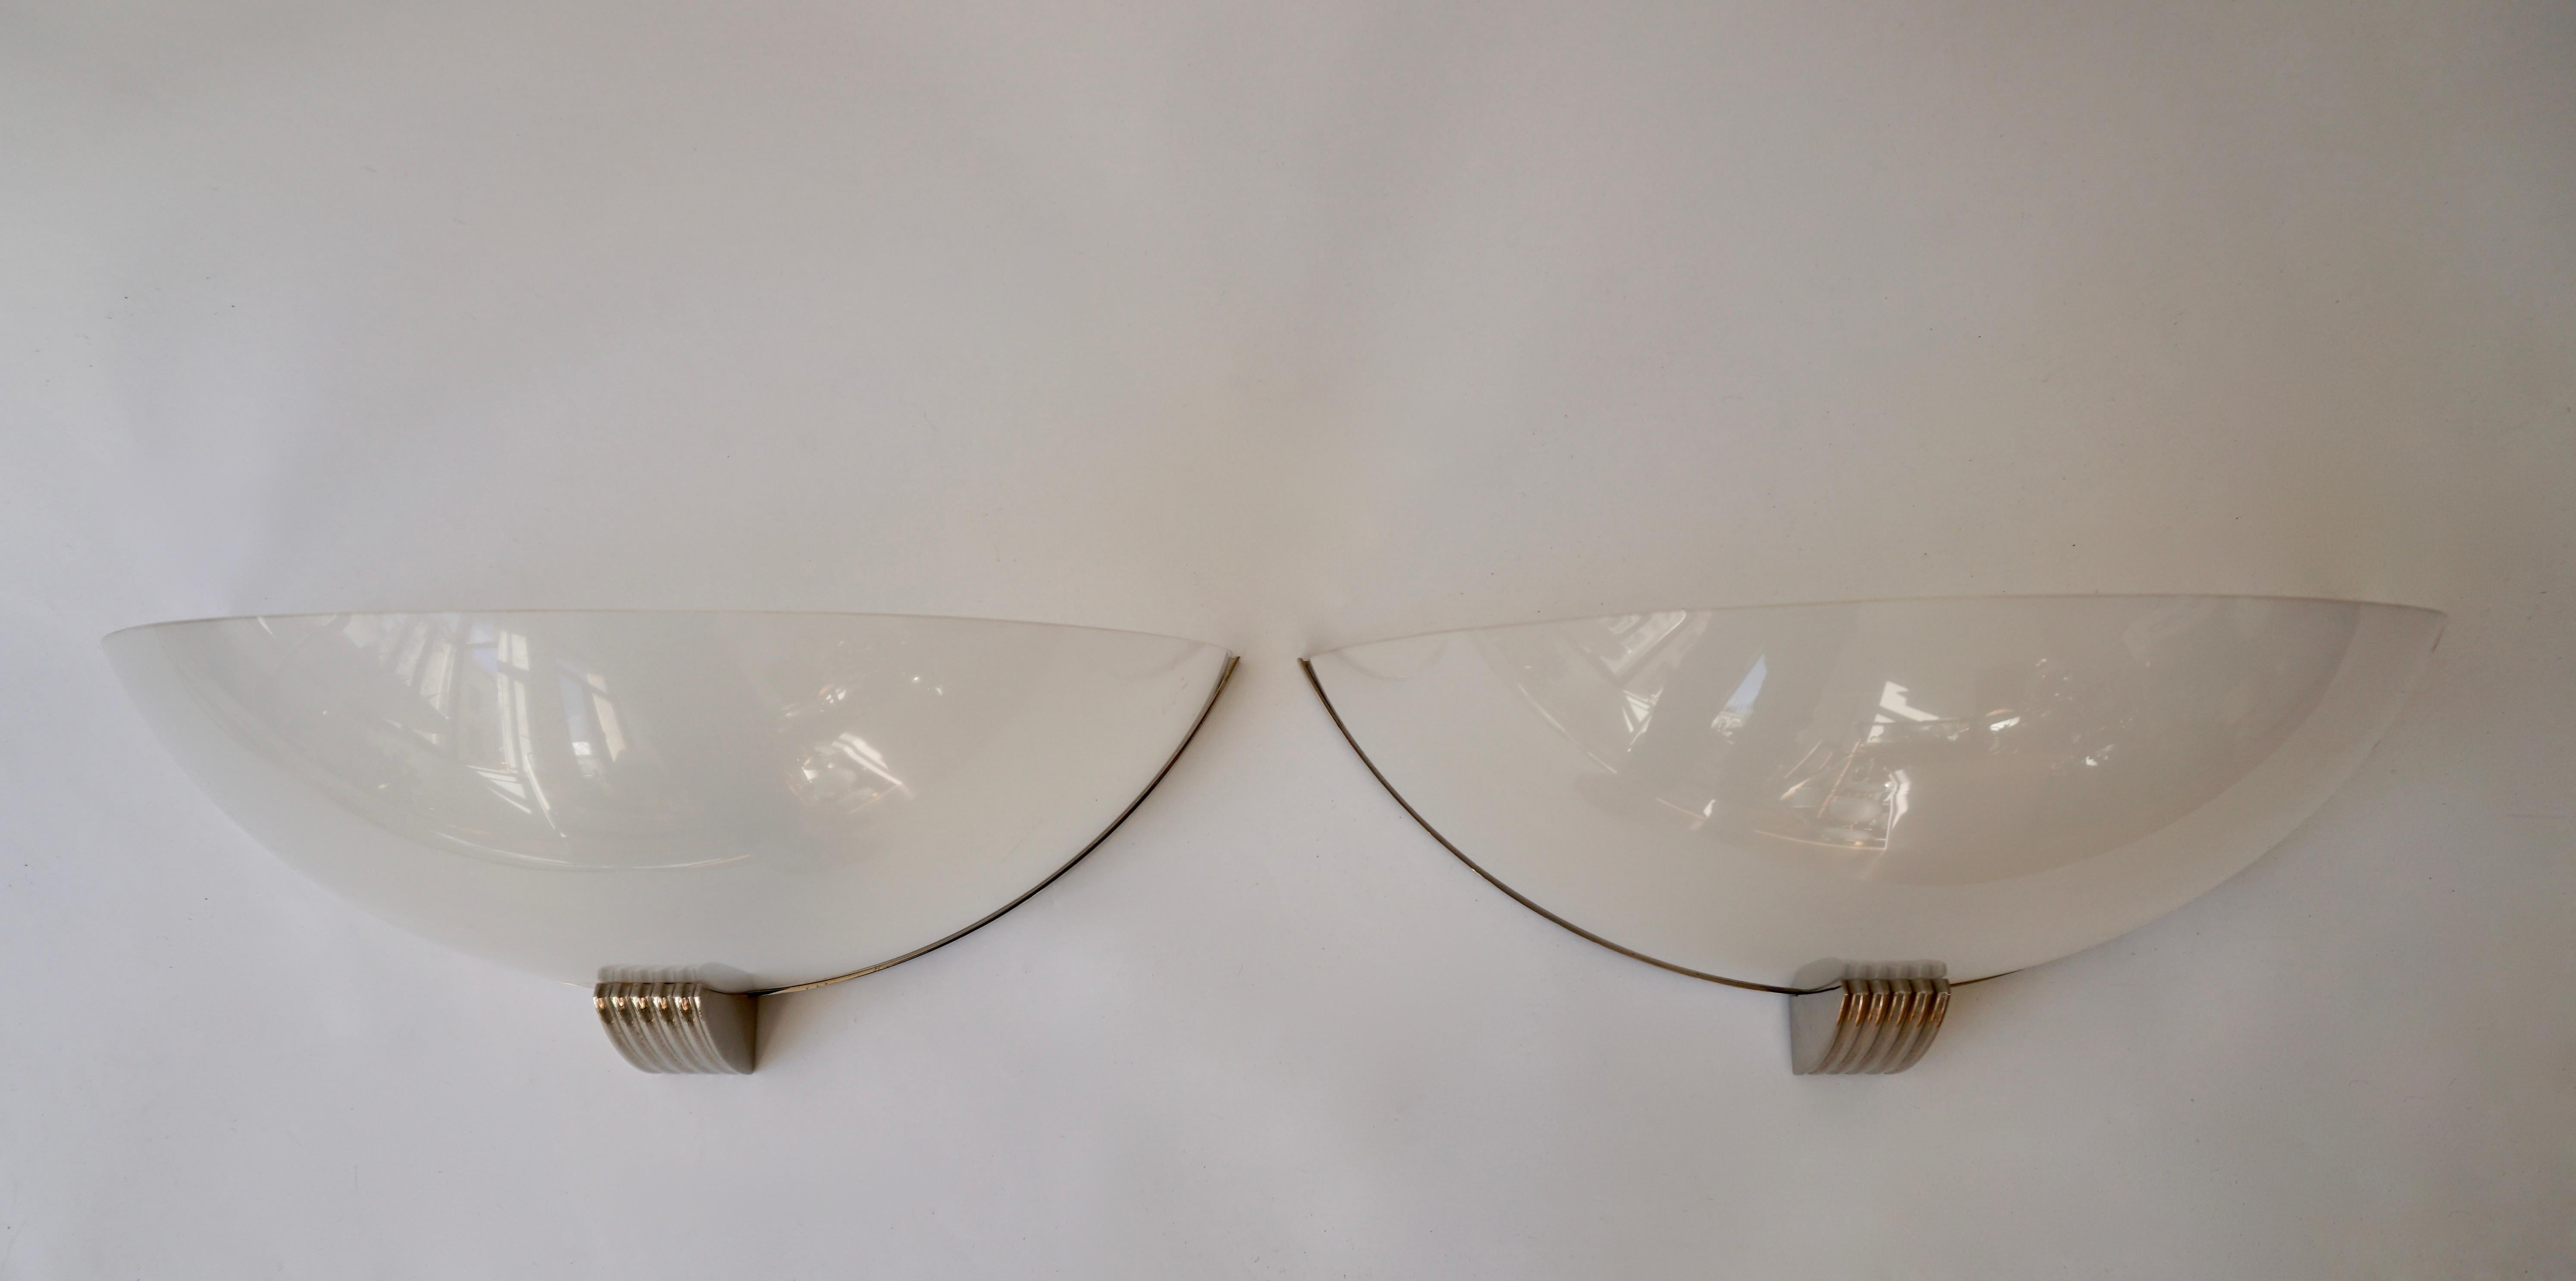 Set of two elegant Art Deco wall lamps or sconces. Manufactured in the 1920s and executed in polished metal en plastic.
Each lamp needs two x E14 Edison screw fit bulbs.
Dimensions:
Width 51 cm.
Height 21 cm.
Depth 26 cm.